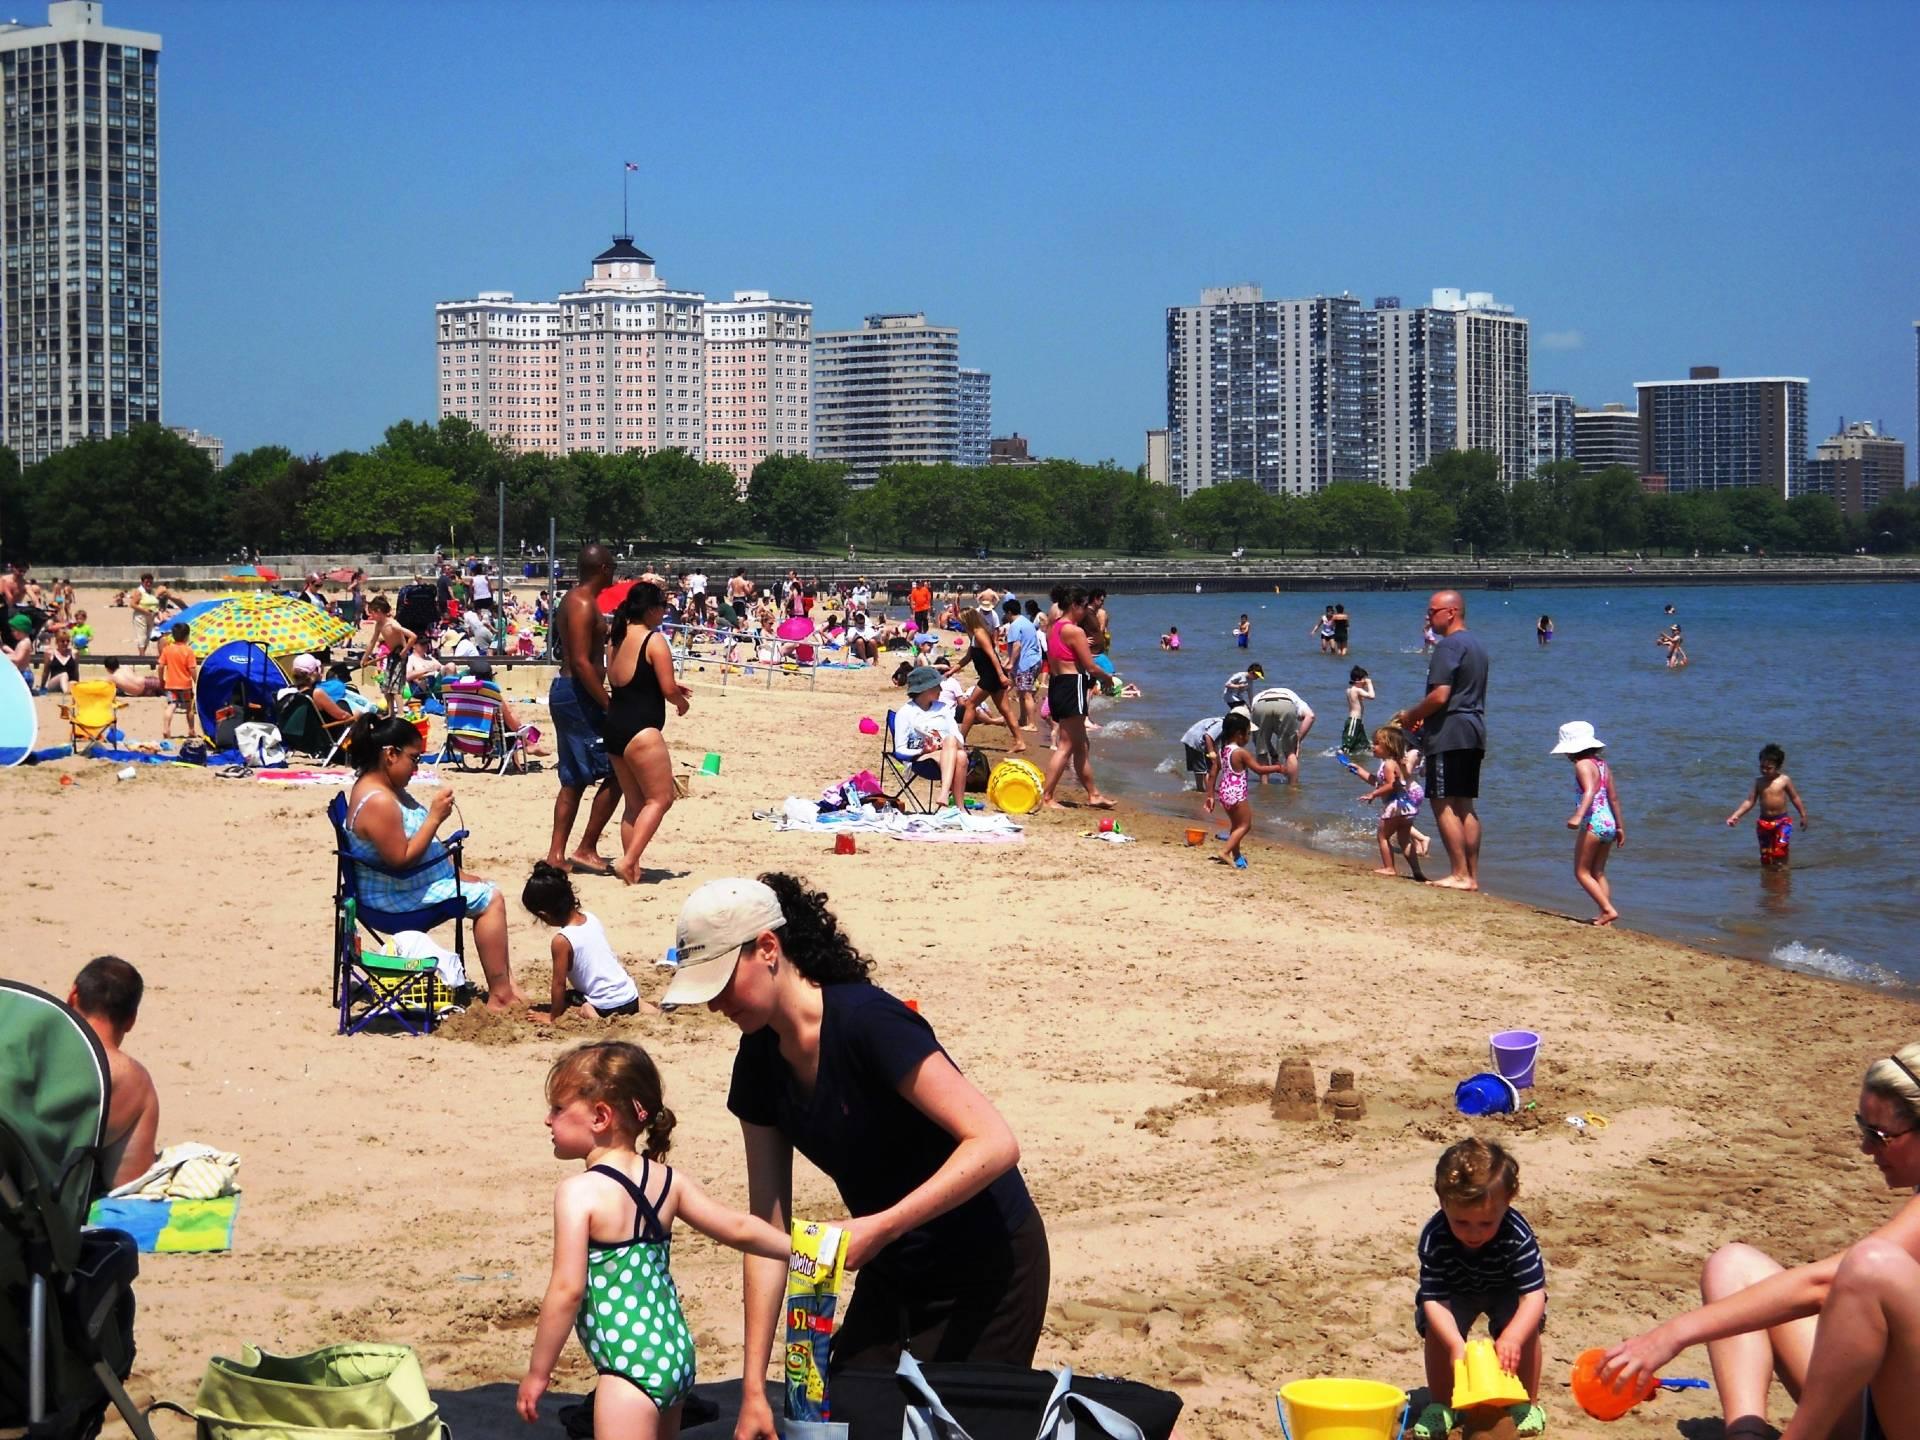 Foster Beach is located in Lincoln Park. (Alanscottwalker / Wikimedia Commons)